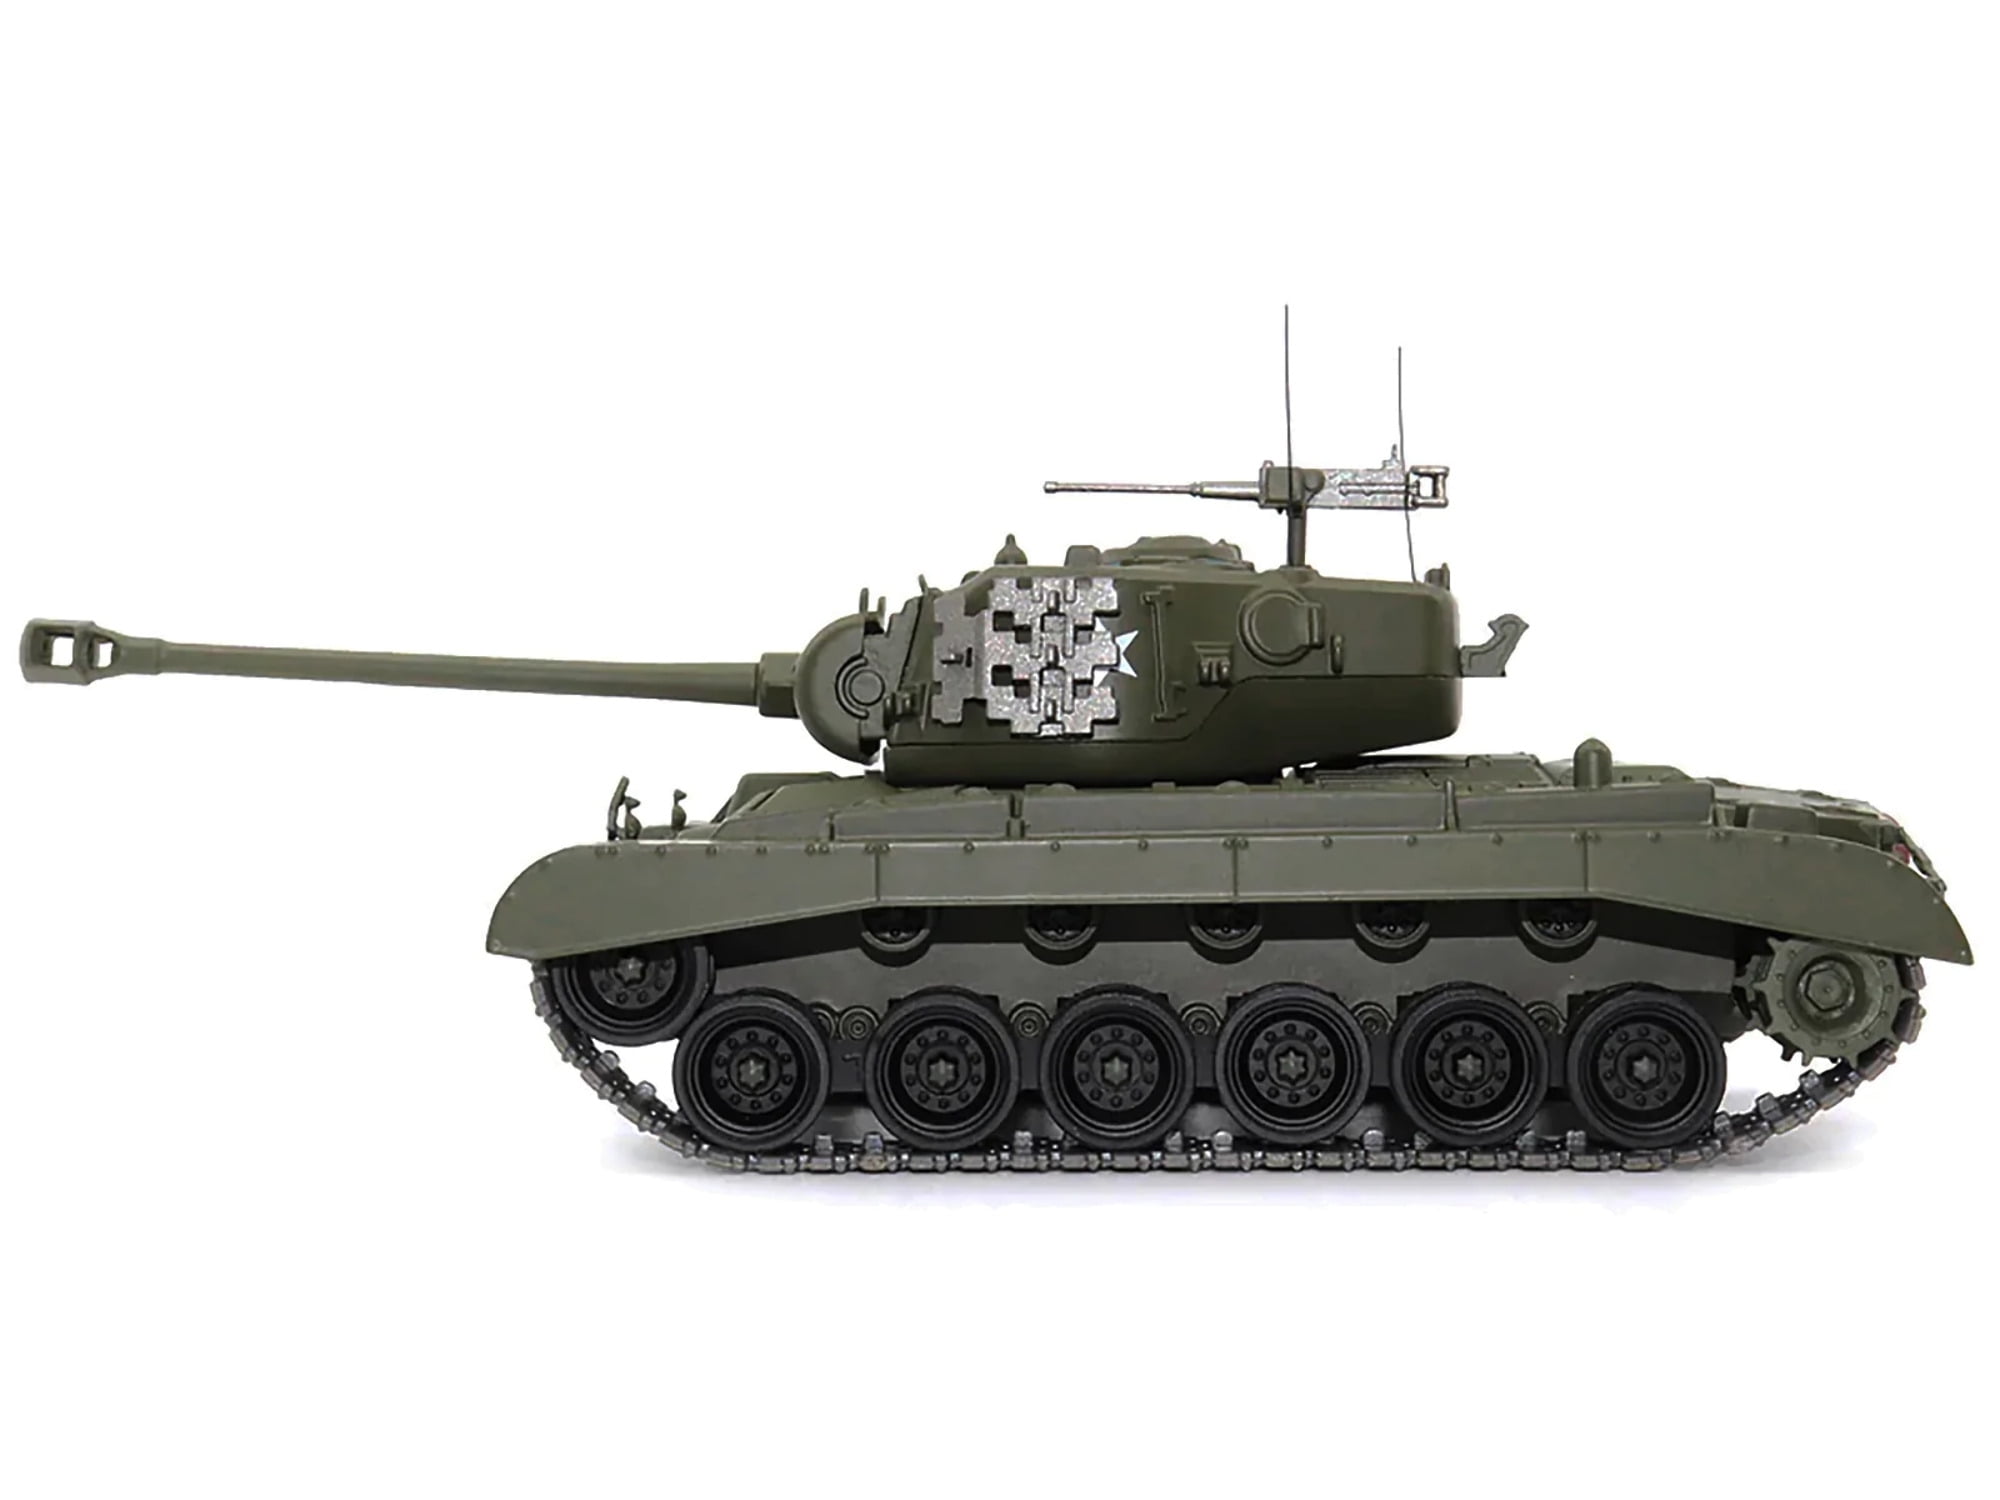 Picture of AFVs of WWII 23194-45 M26 Tank USA 2nd Armored Division Germany April 1945 1 by 43 Scale Diecast Model Car